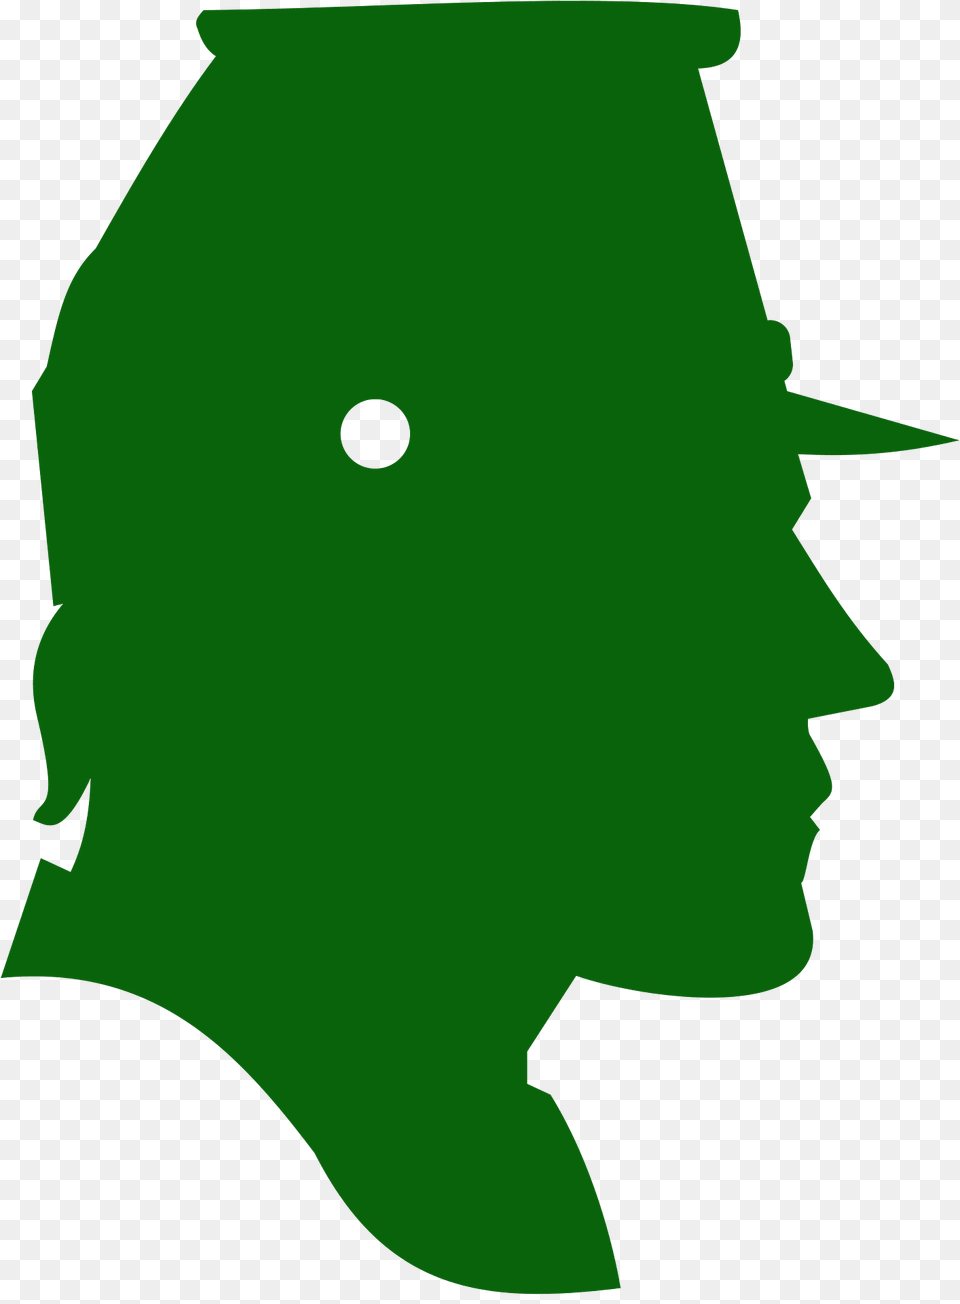 Us Civil War Soldier Silhouette, Green, Leaf, Plant, Fish Png